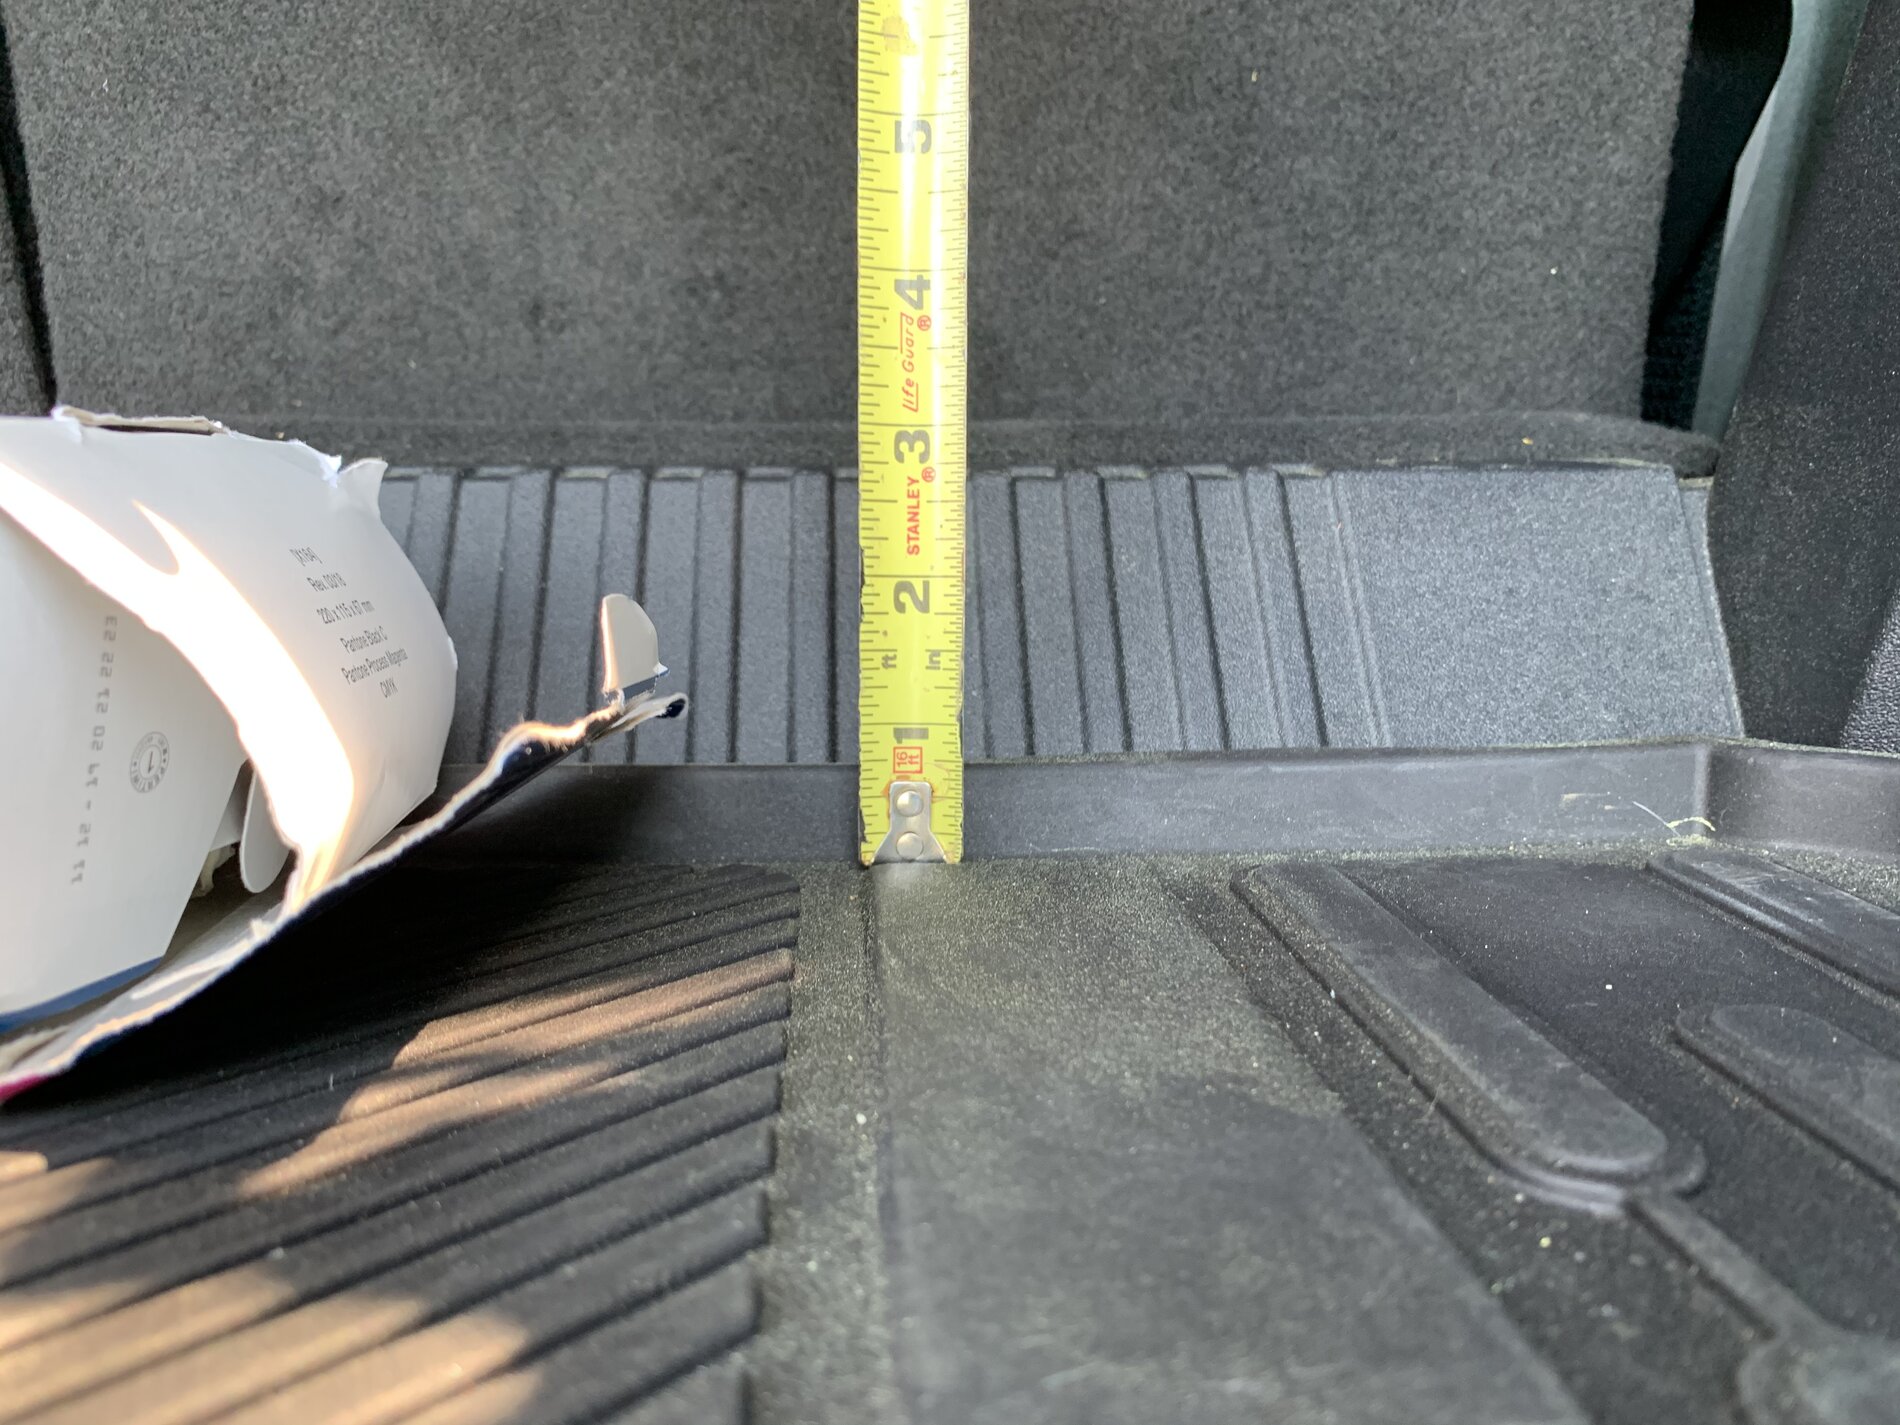 Ford Bronco Visibility / rear view mirror measurements + lots of other pics/observations bronco ris